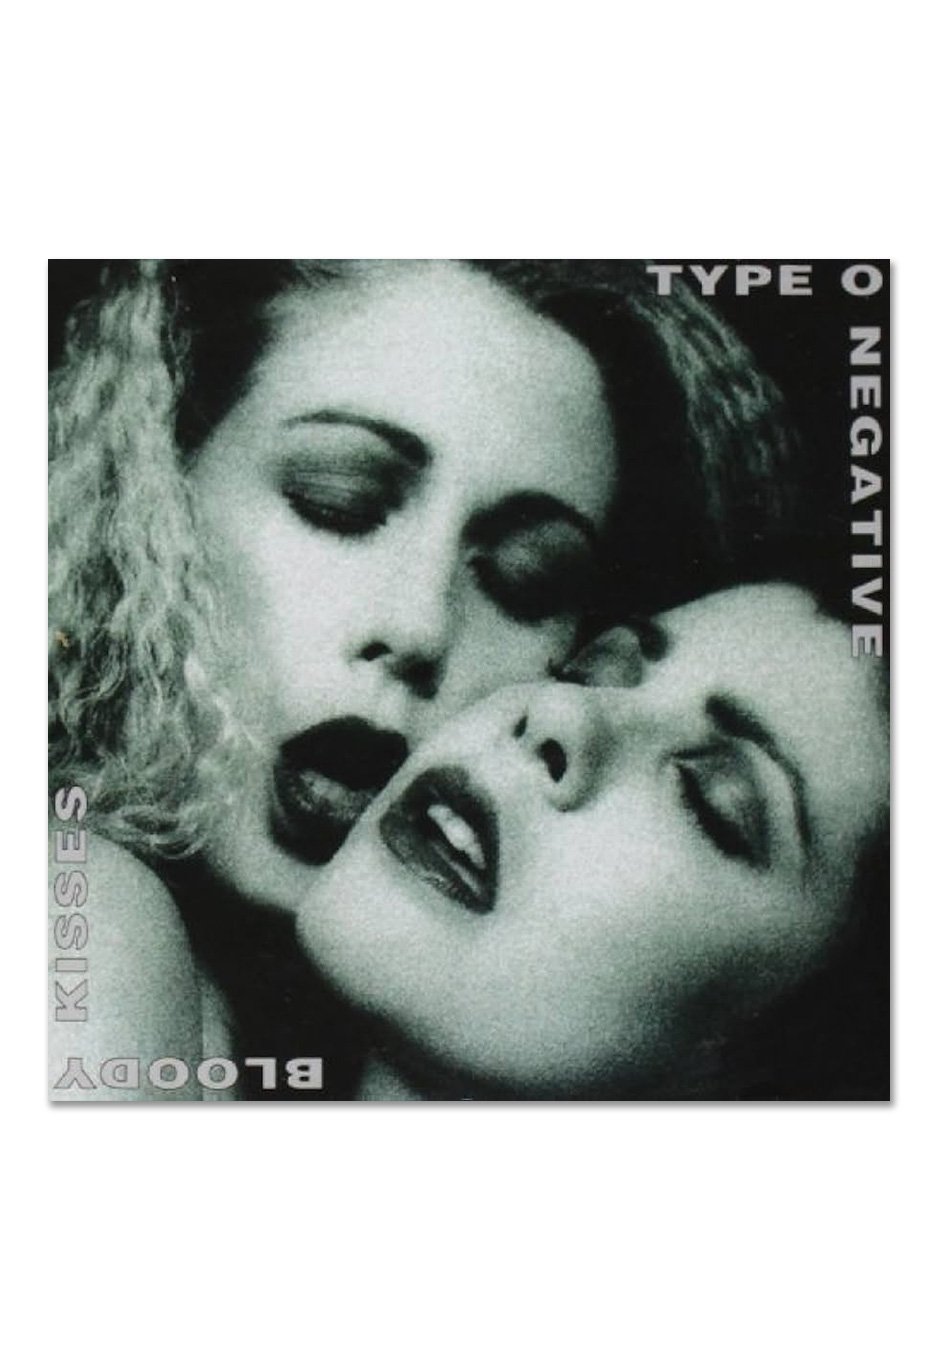 Type O Negative - Bloody Kisses (Deluxe Edition) - Digipak 2 CD